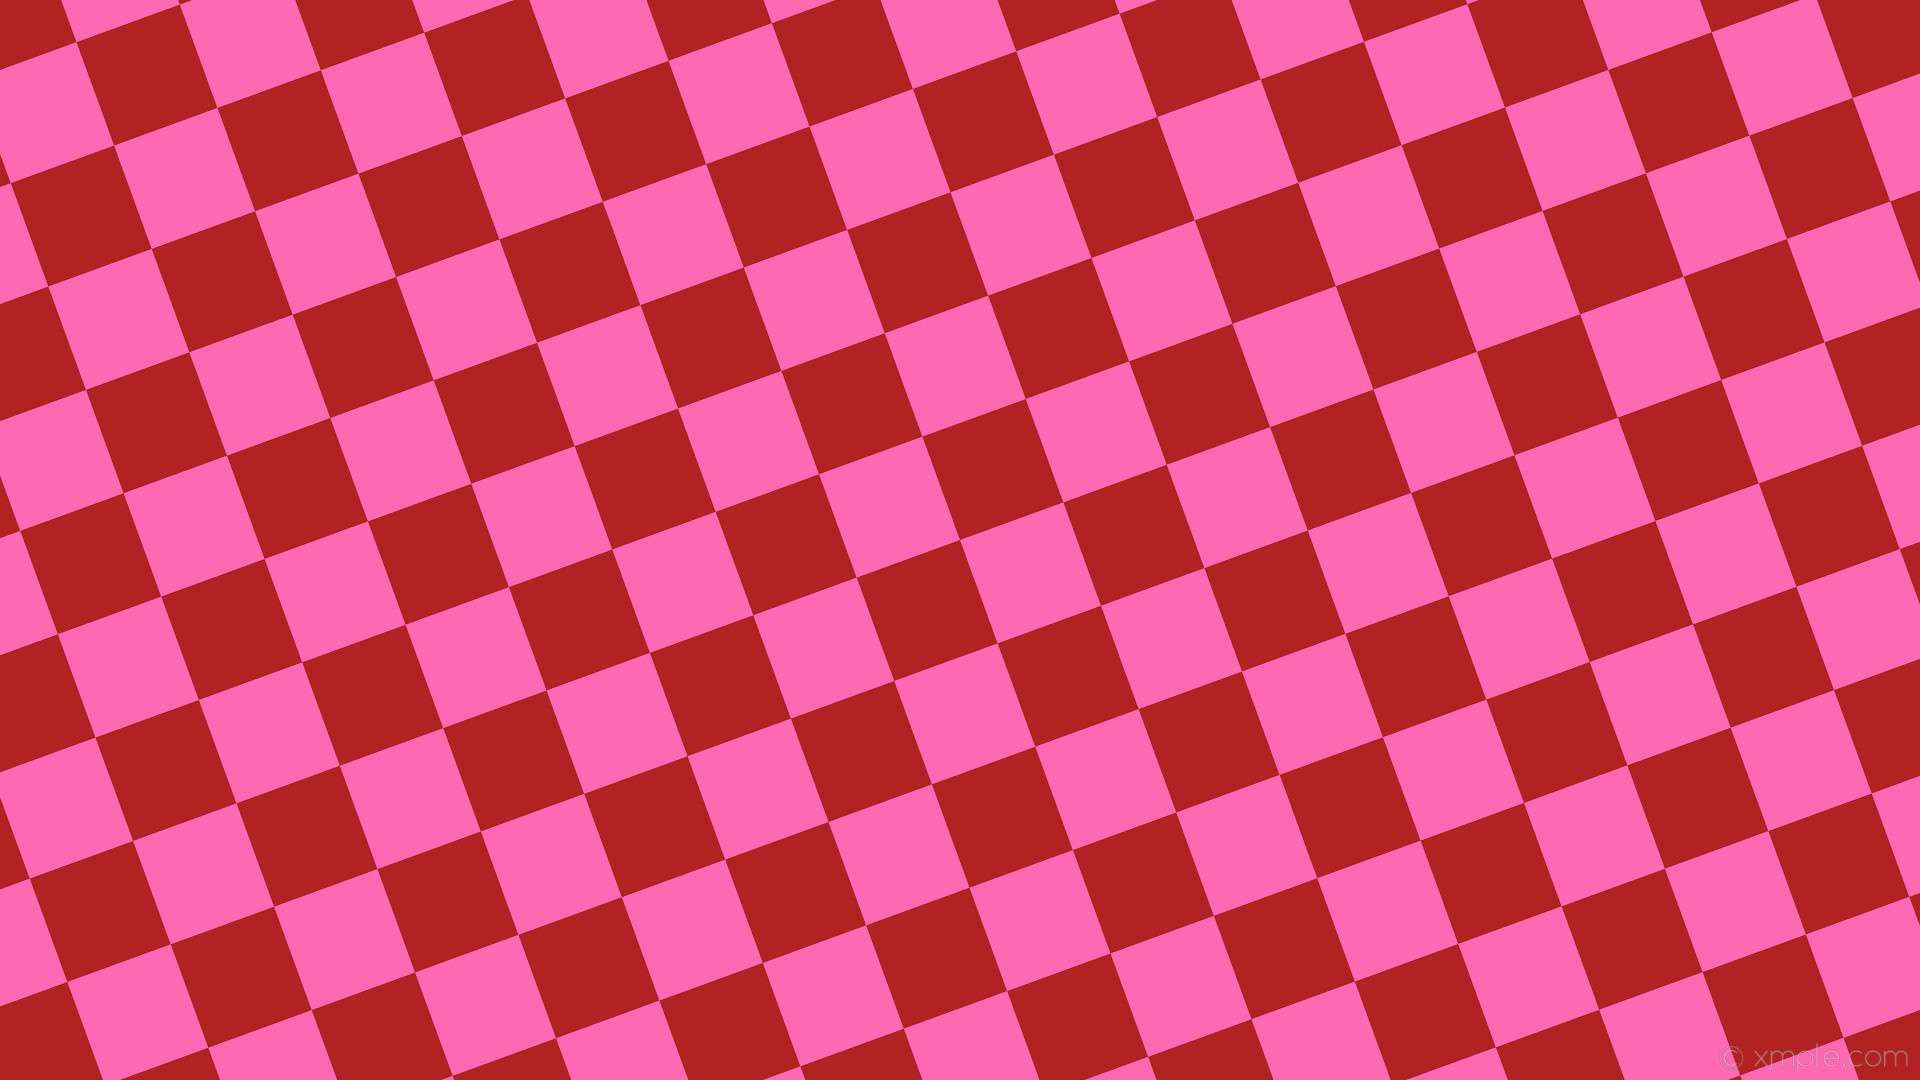 Red Checked Wallpaper.